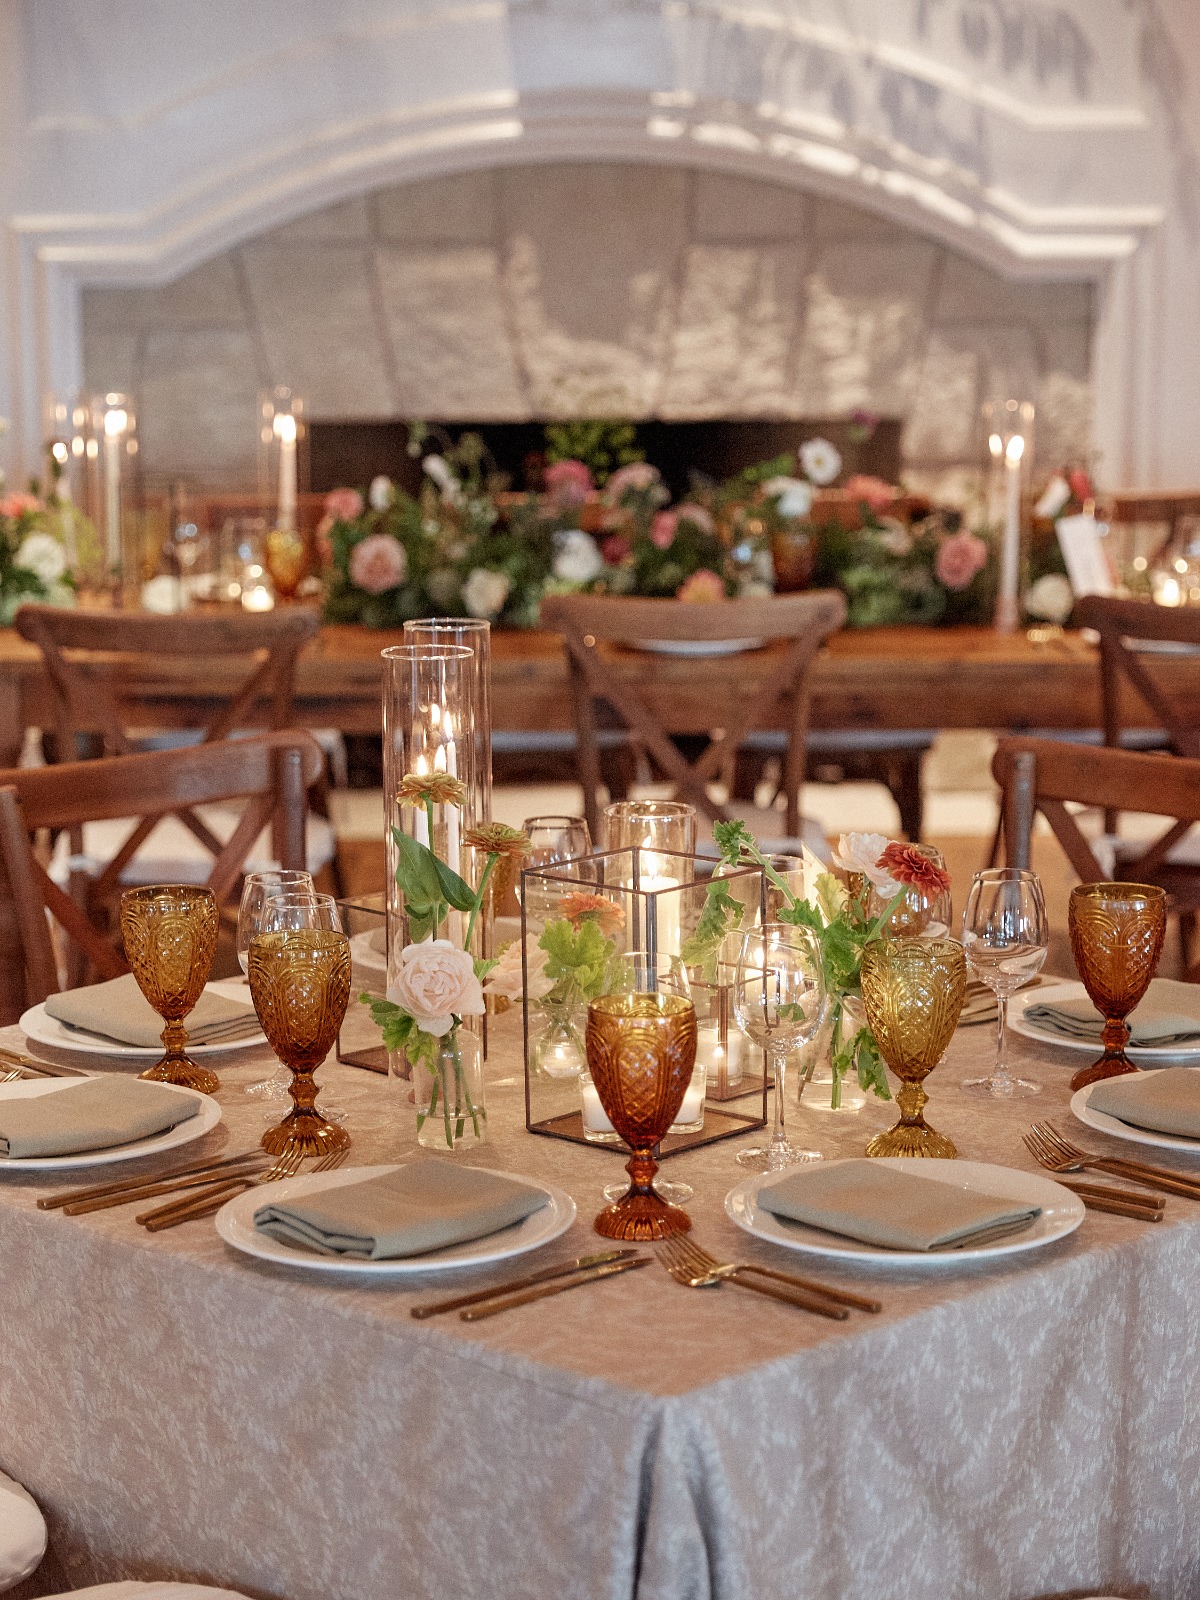 Reception tables with place-settings, glasses, and centerpieces with candles